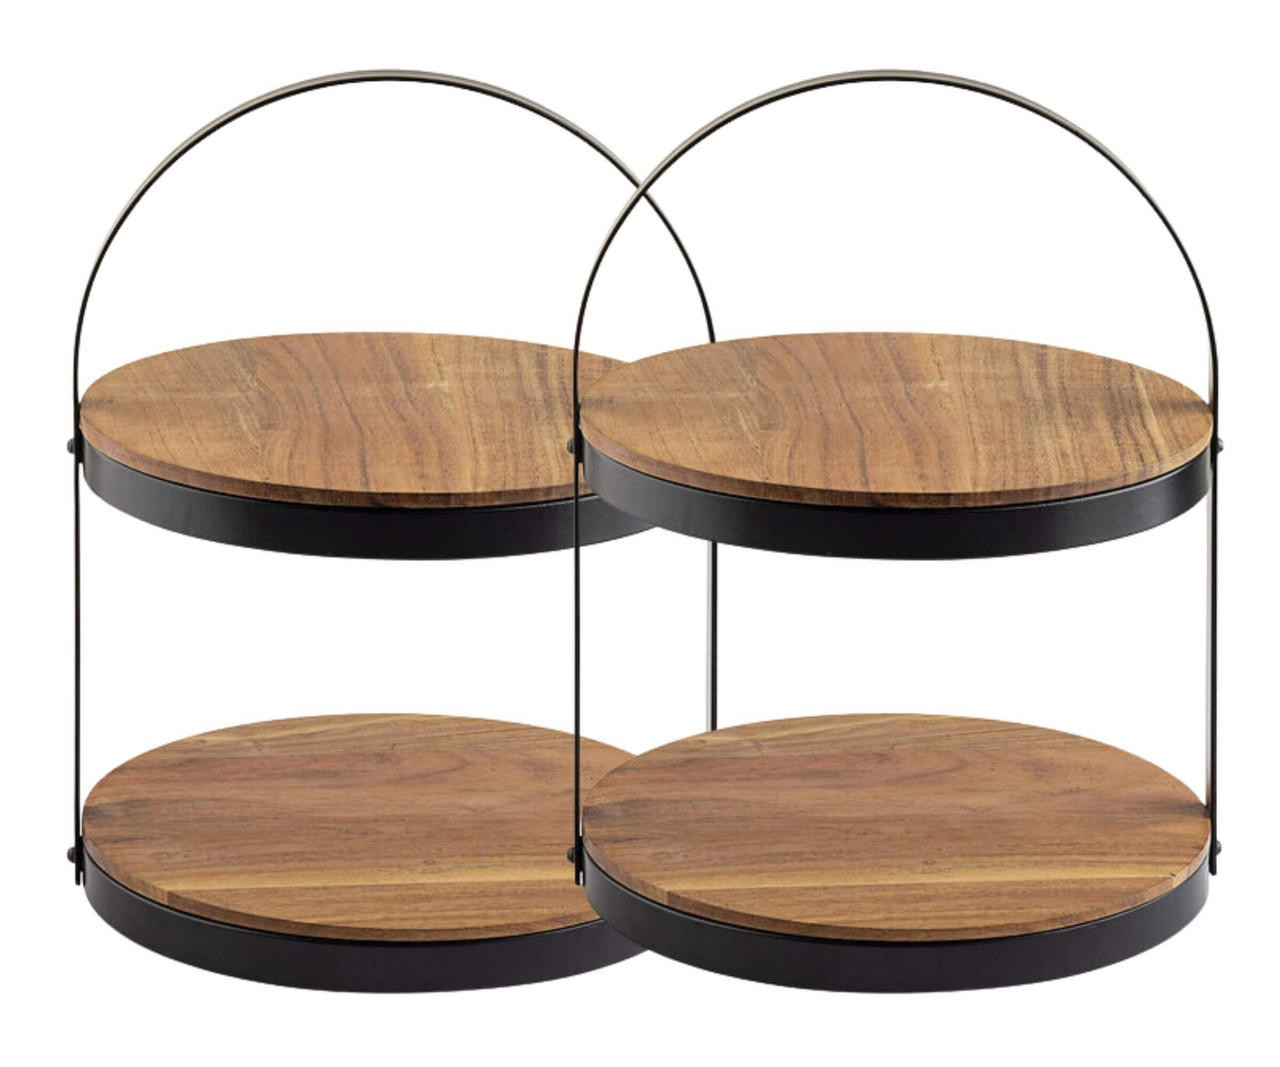  Tablecraft Two Tier Round Wood Acacia Display Stand (2-Pack) - 11 3/4" x 11 3/8" x 15" - Stylish Display Solution 